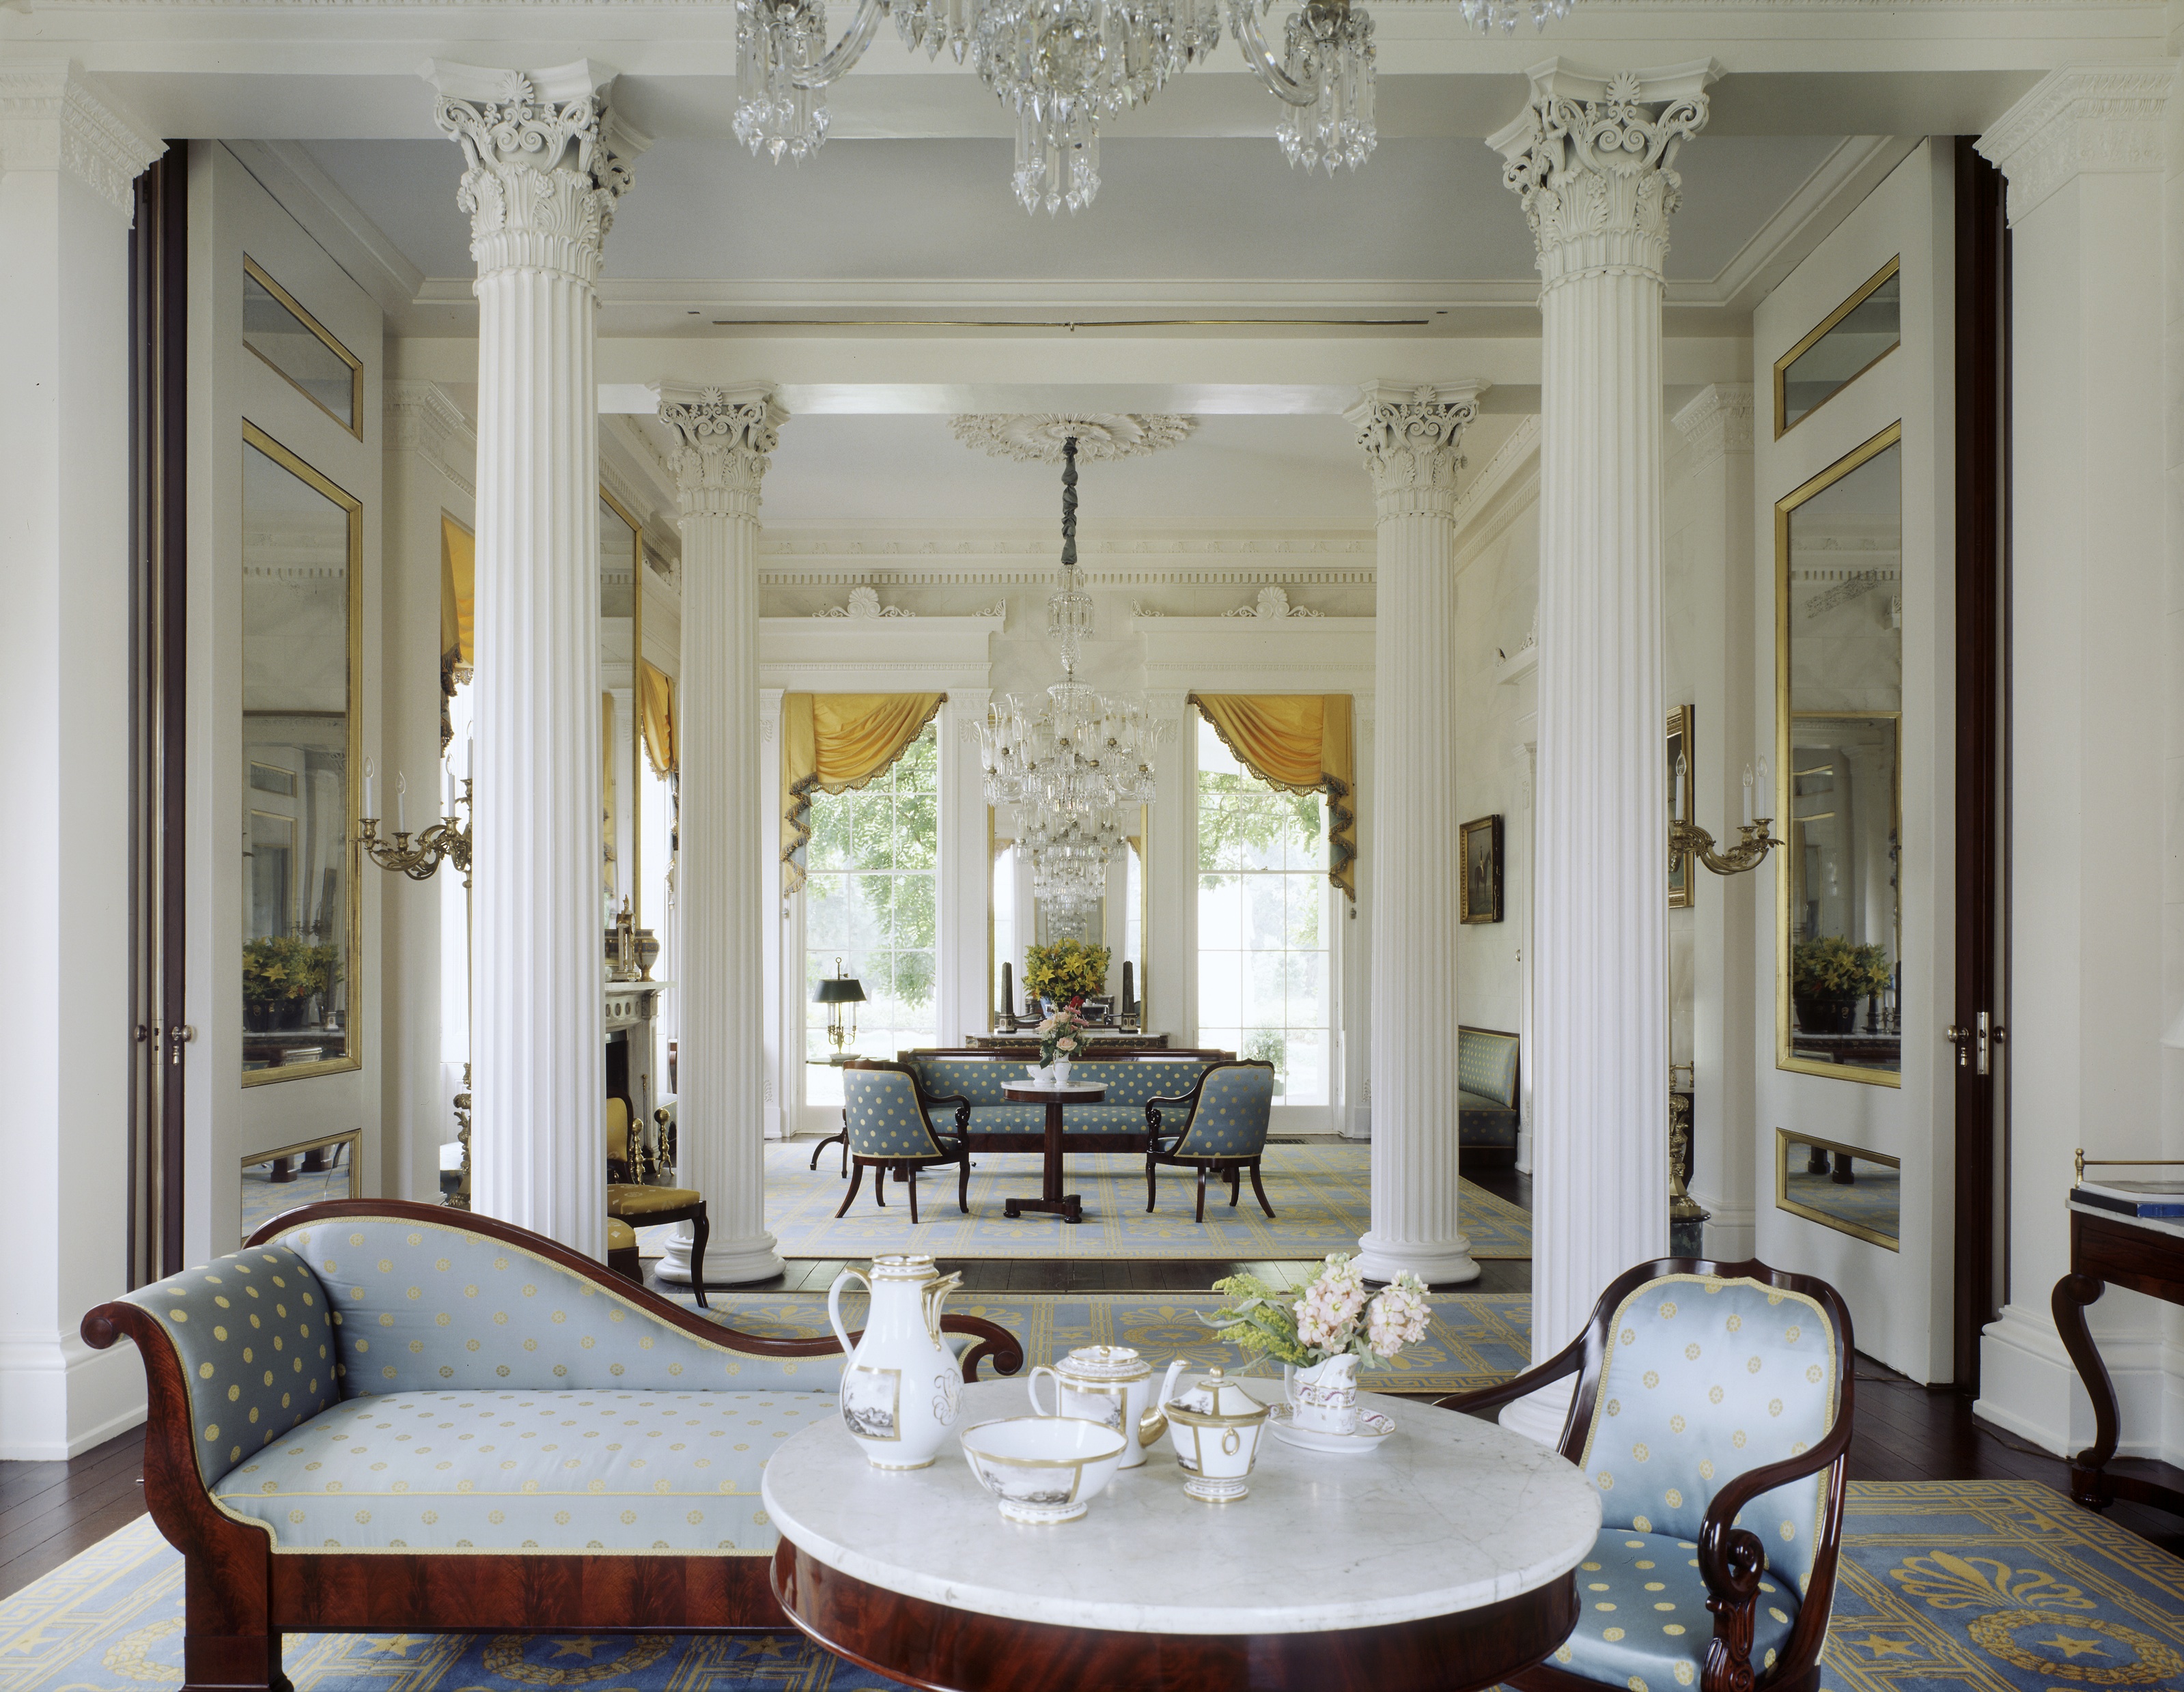 The double parlors are separated by a screen of Corinthian columns and feature almost exclusively Duncan Phyfe furniture commissioned by the Mannings.
